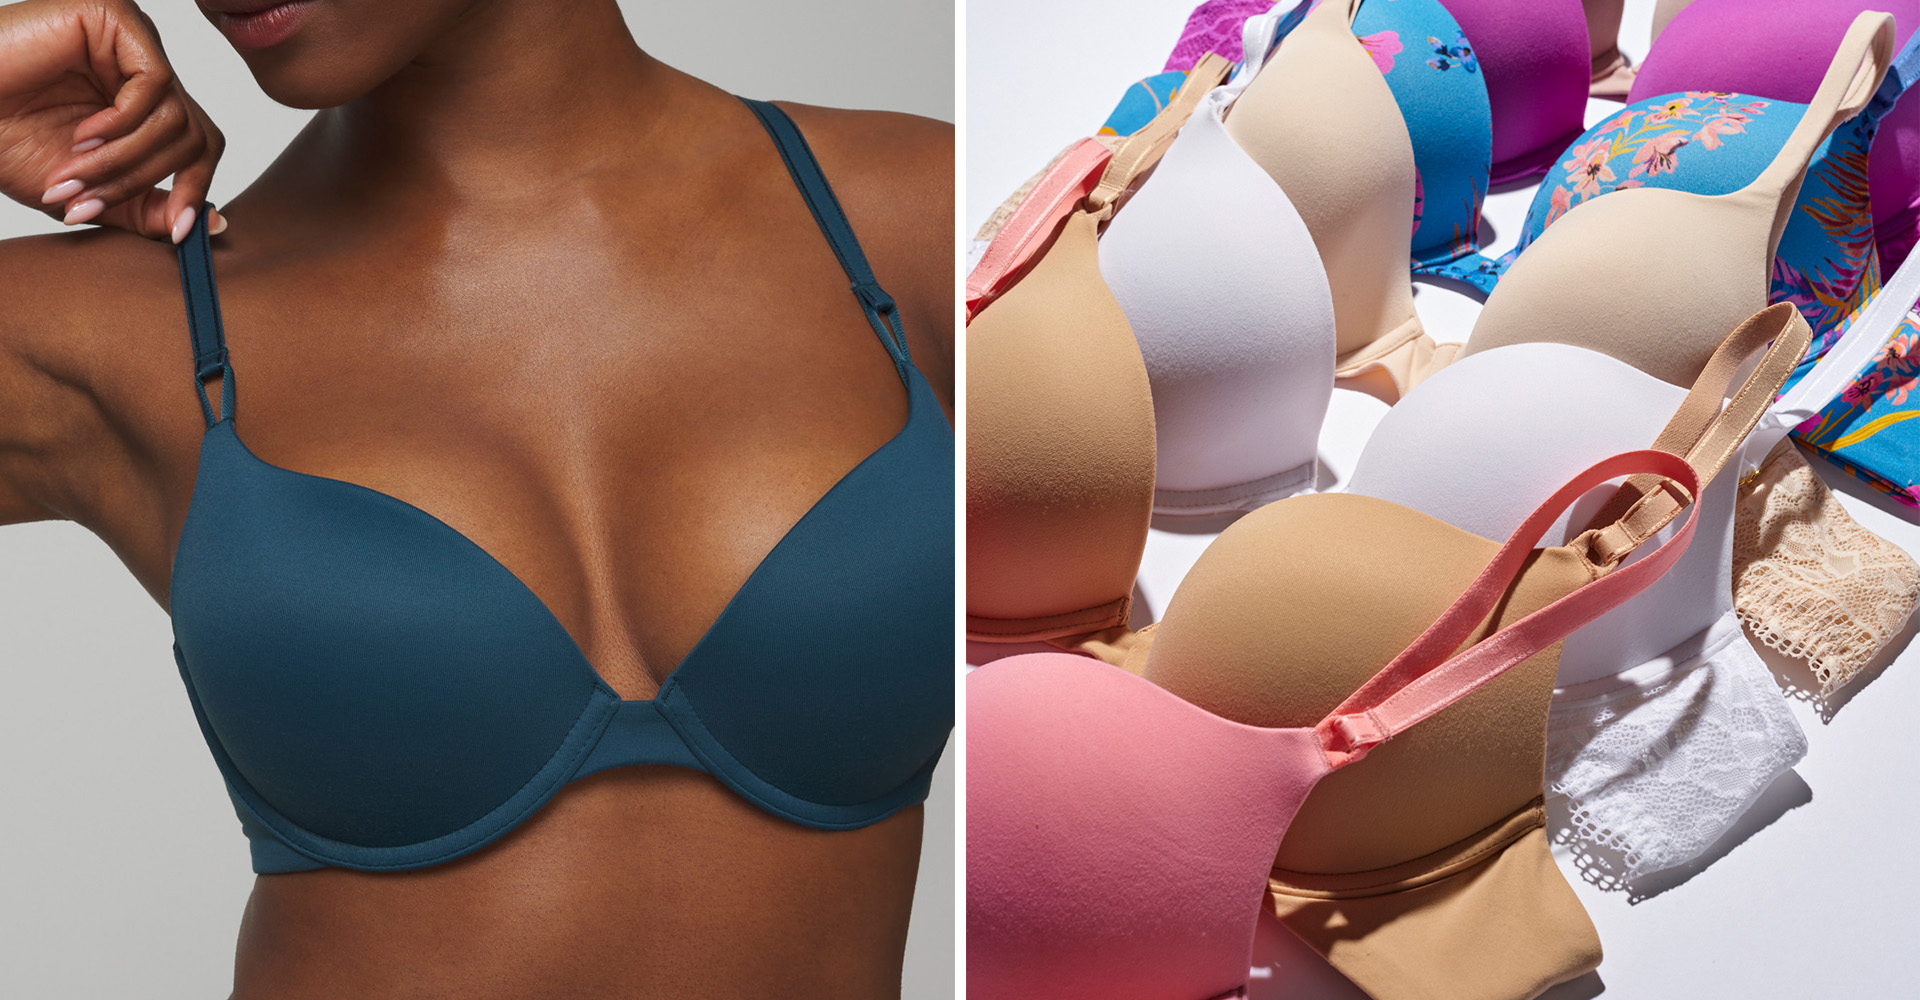 Soma<sup class=st-superscript>®</sup> model in dark blue push-up bra. Laydown of push-up bras in a variety of colors and prints.